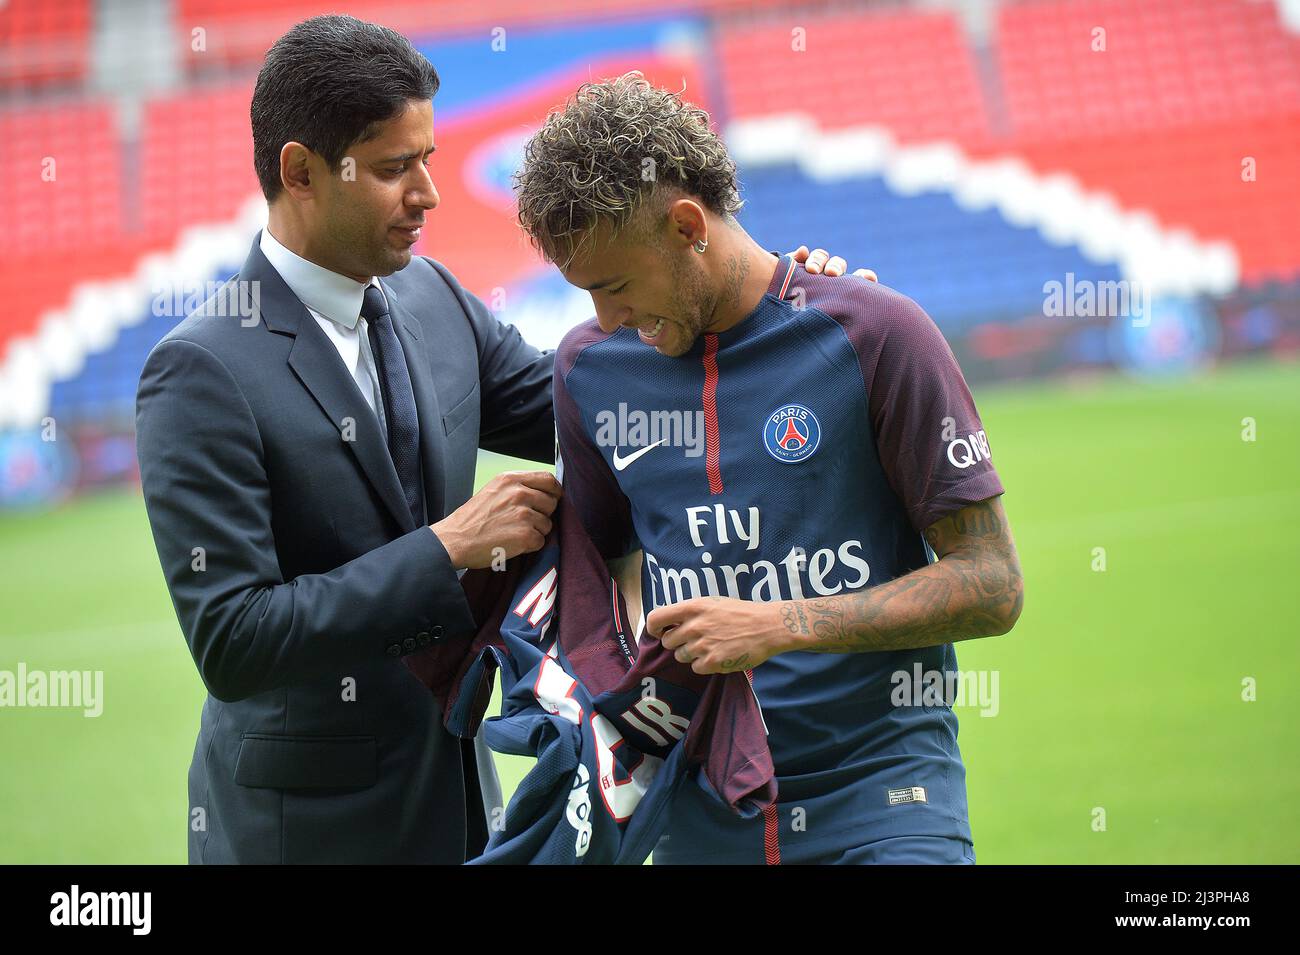 Neymar signing as new player from FC Barcelona to Paris Saint Germain with President of PSG Nasser Al-Khelaifi Stock Photo